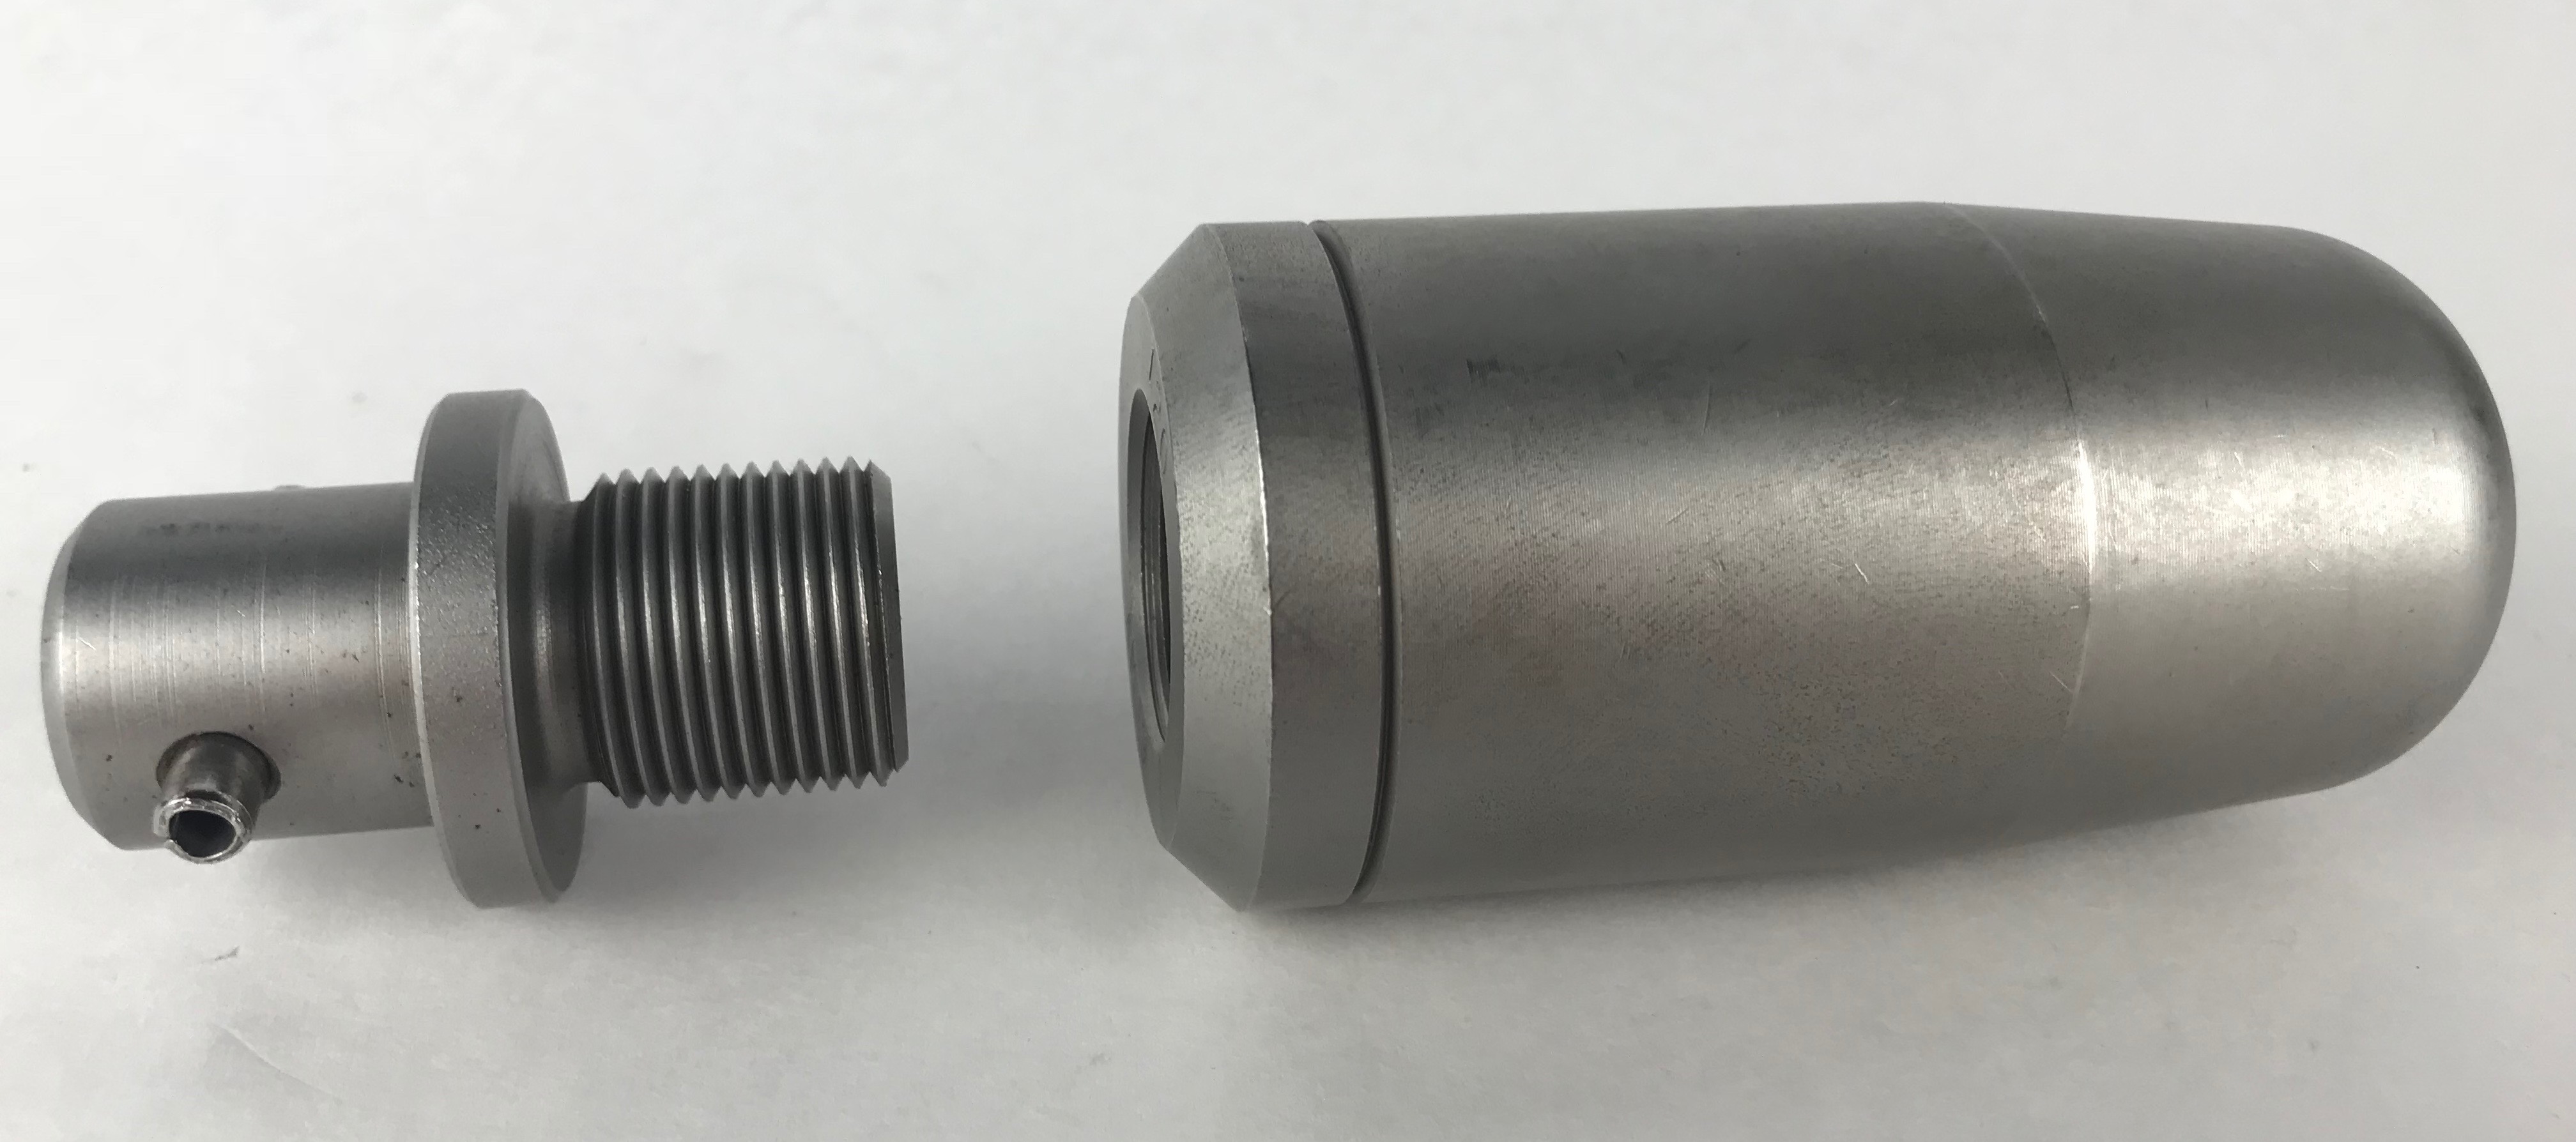 The Huth Swage die in a silver-colored steel finish is shown with a PKDS-823 adapter for connecting the BendPak®️ machines with the Huth Swage end-forming tooling. 